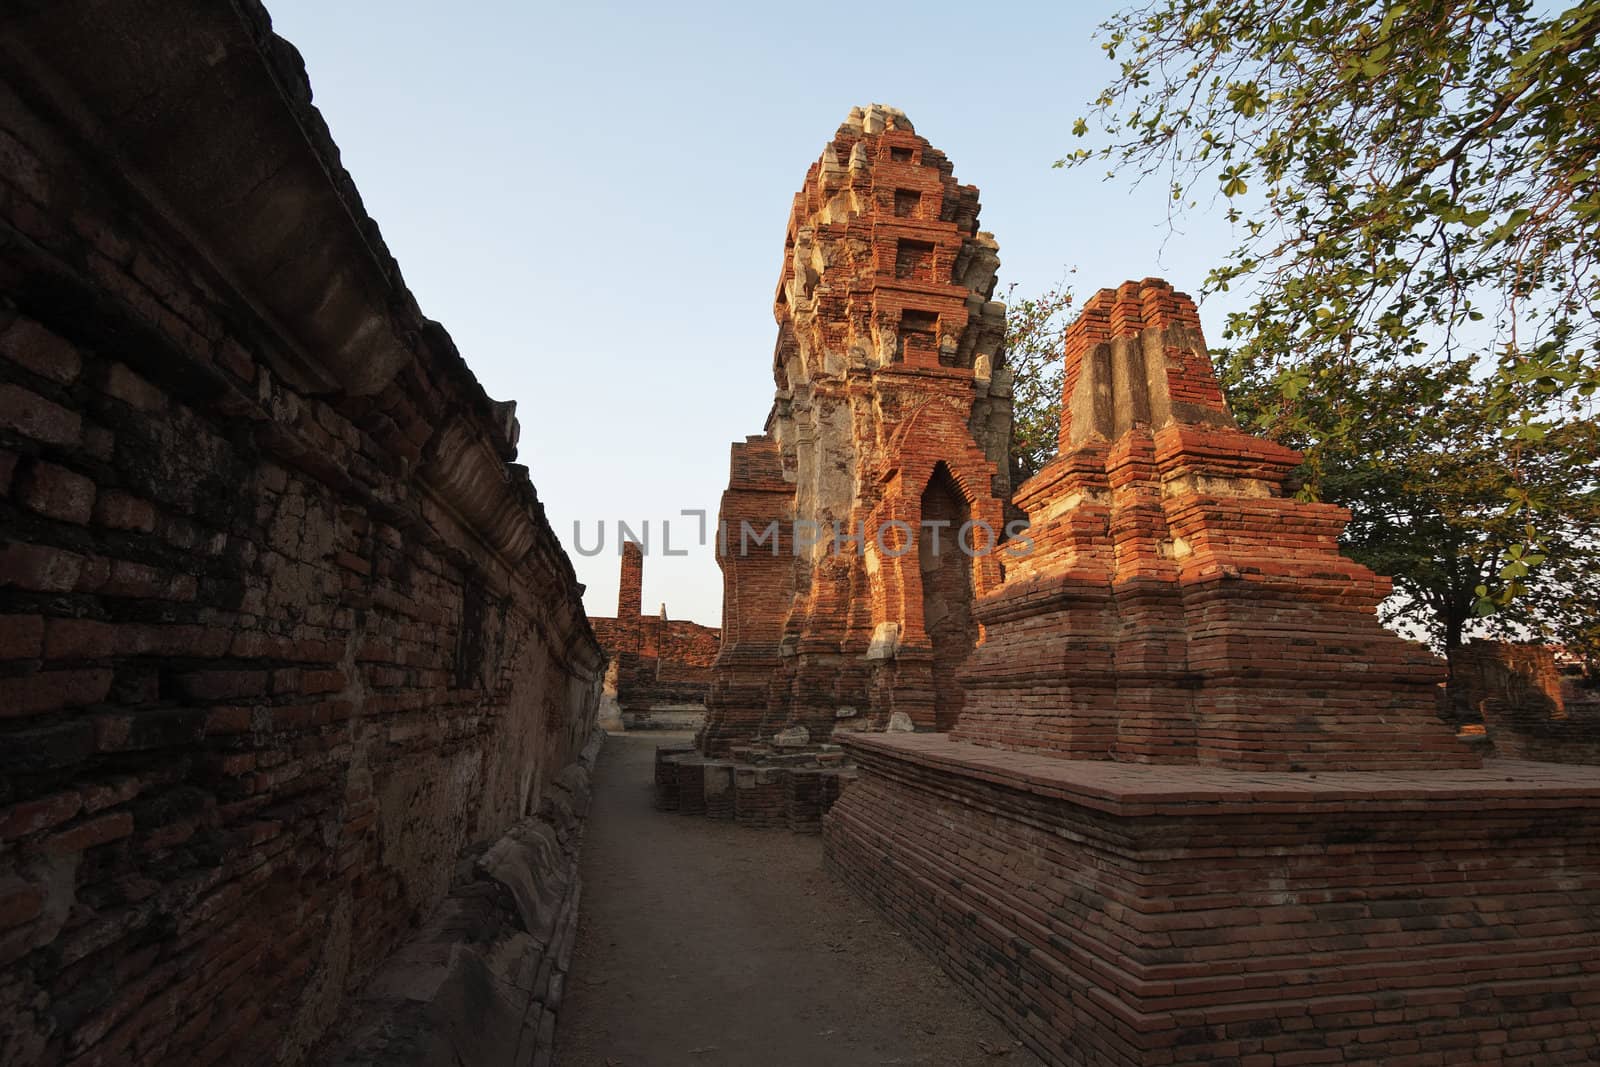 THAILAND, Ayutthaya, the ruins of the city's ancient temples at sunset